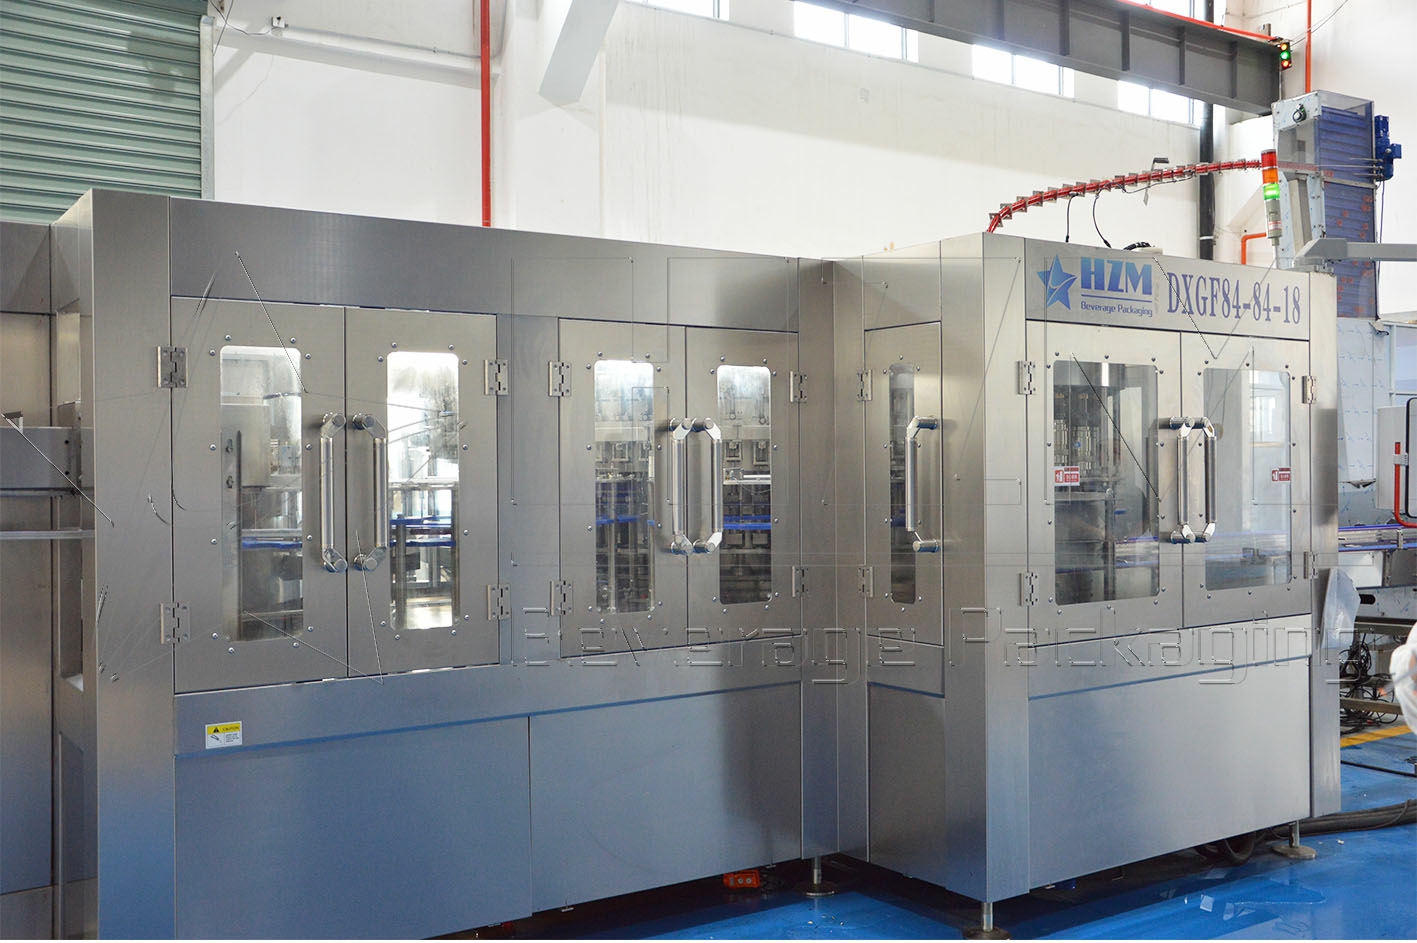 60 Valves  Dry Aseptic Filling Machine with CIP COP SIP